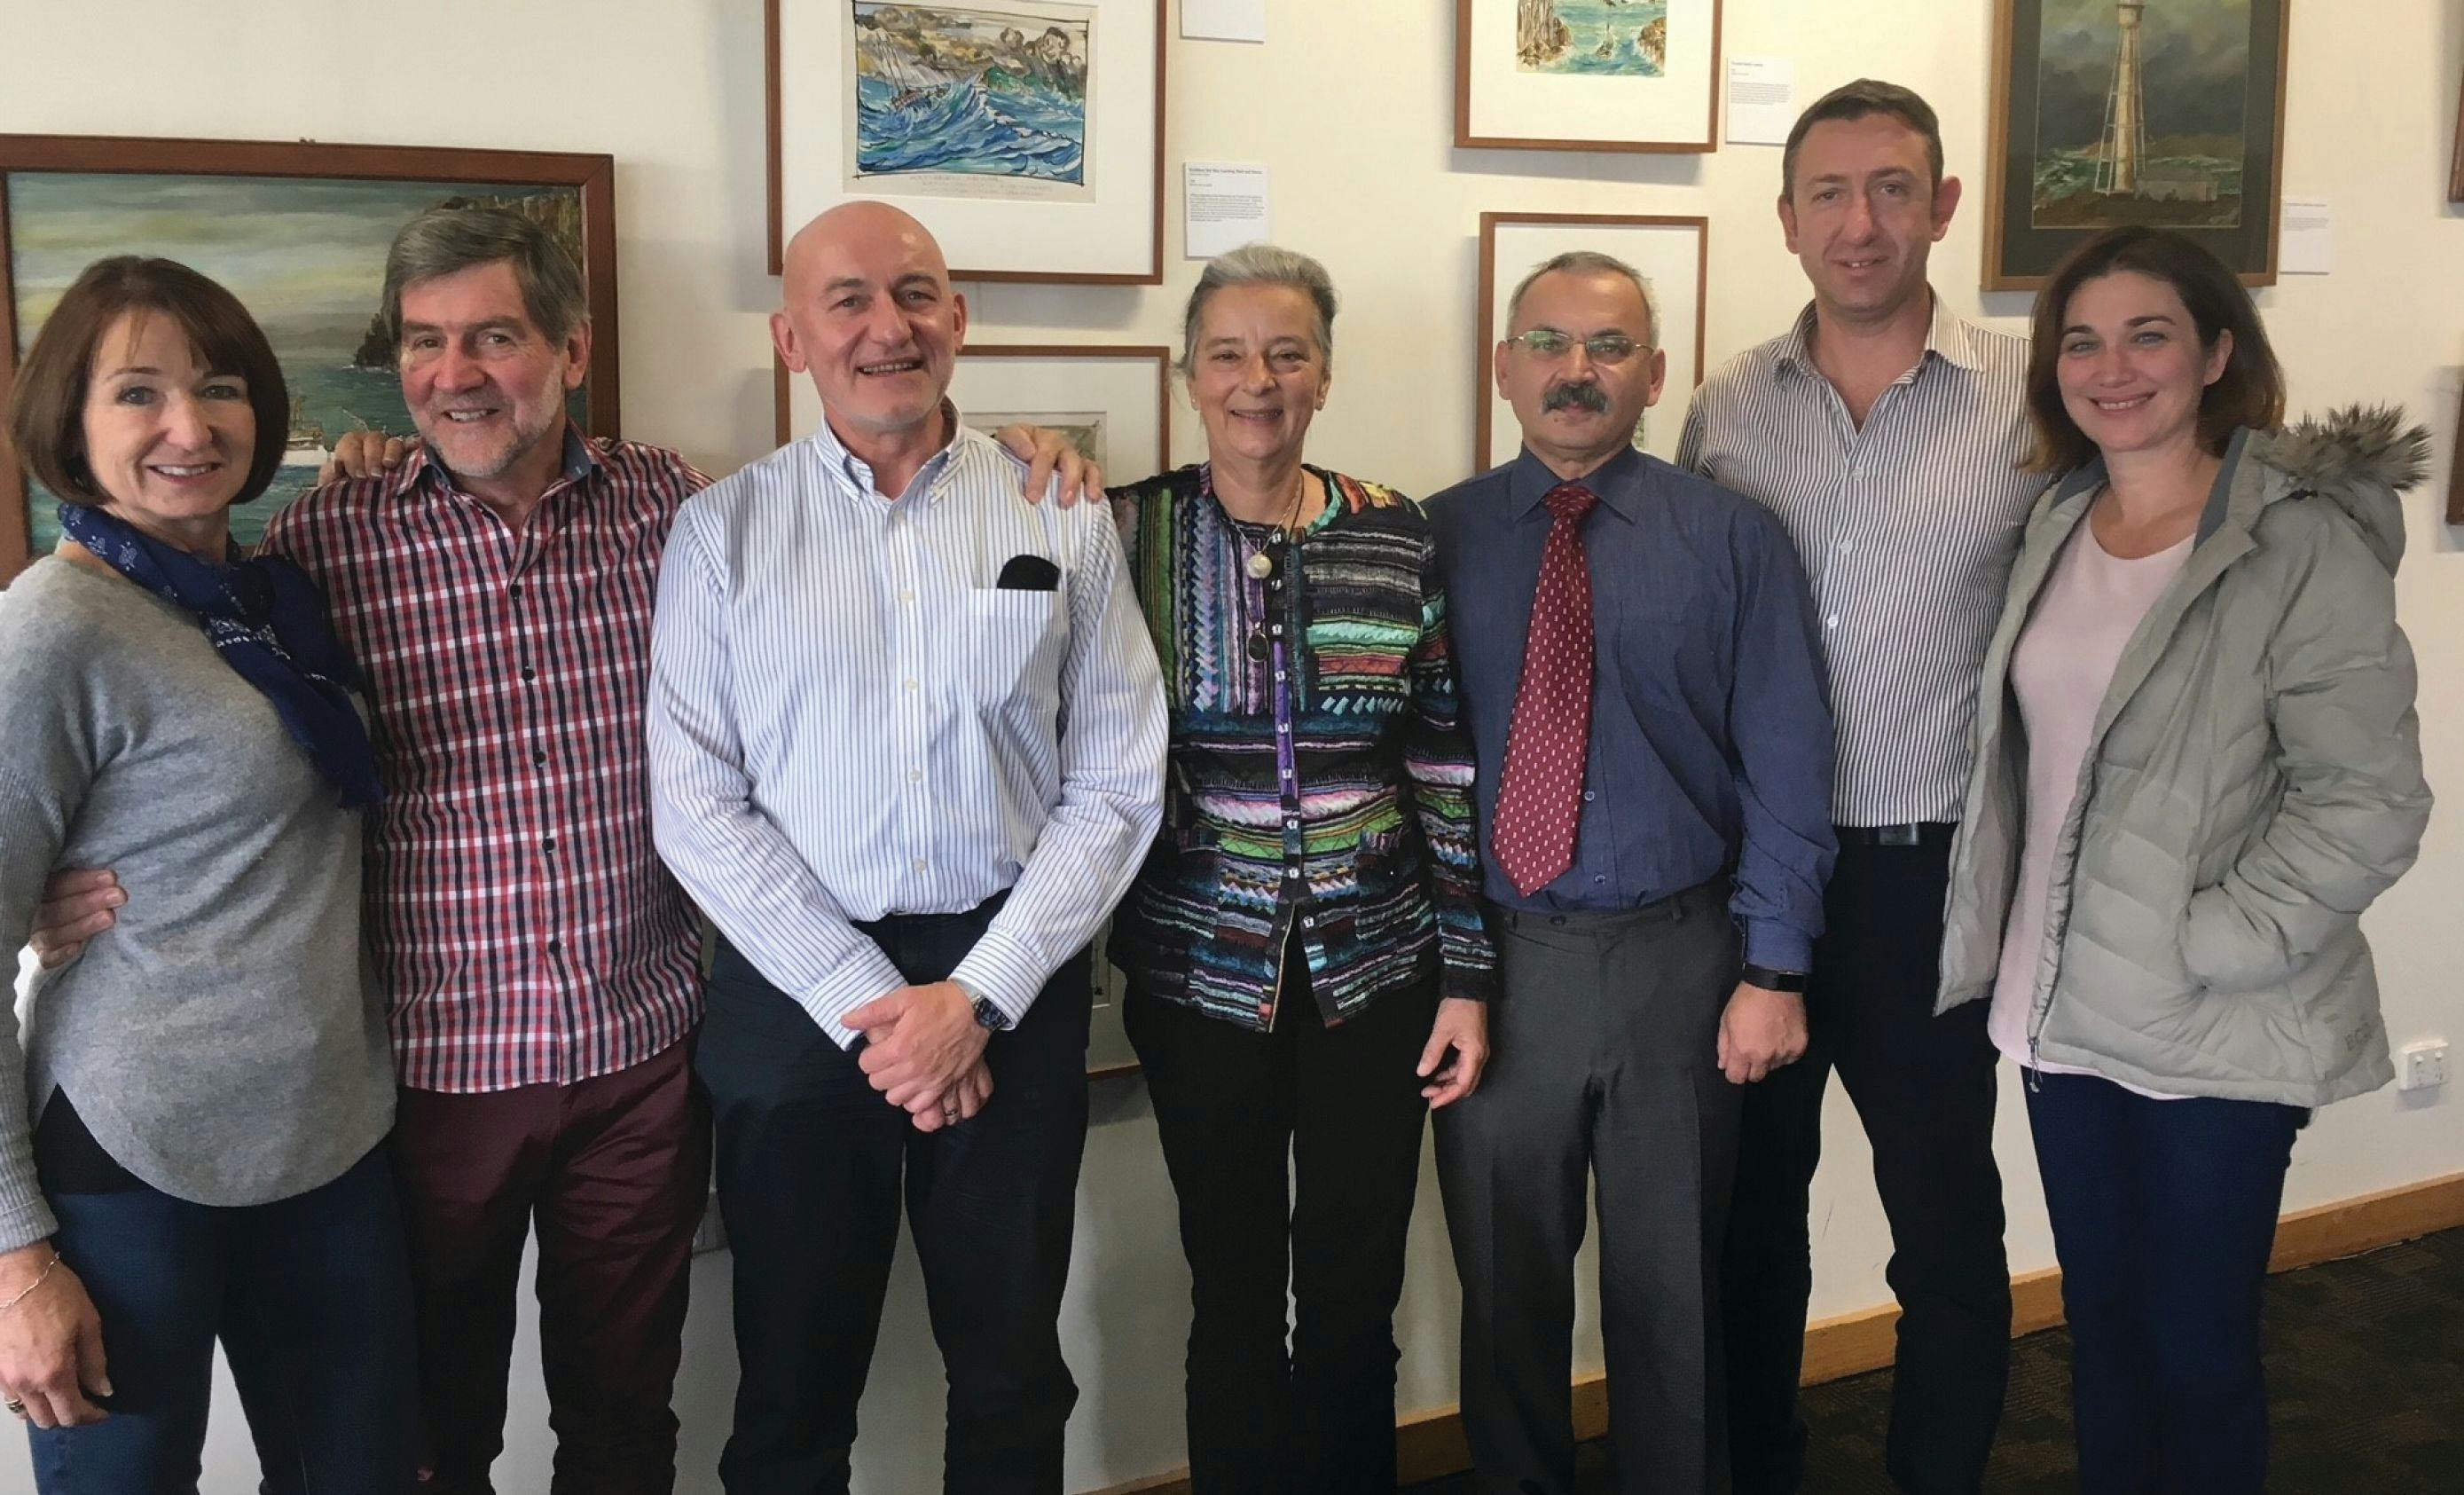 Professor Haddad with wife Kerry (left), and some long-term colleagues within ACROSS: Professor Miroslav Macka (and wife Evi), Professor Pavel Nesterenko, and Professor Brett Paull (and wife Estrella). Image and caption courtesy of Brett Paull.